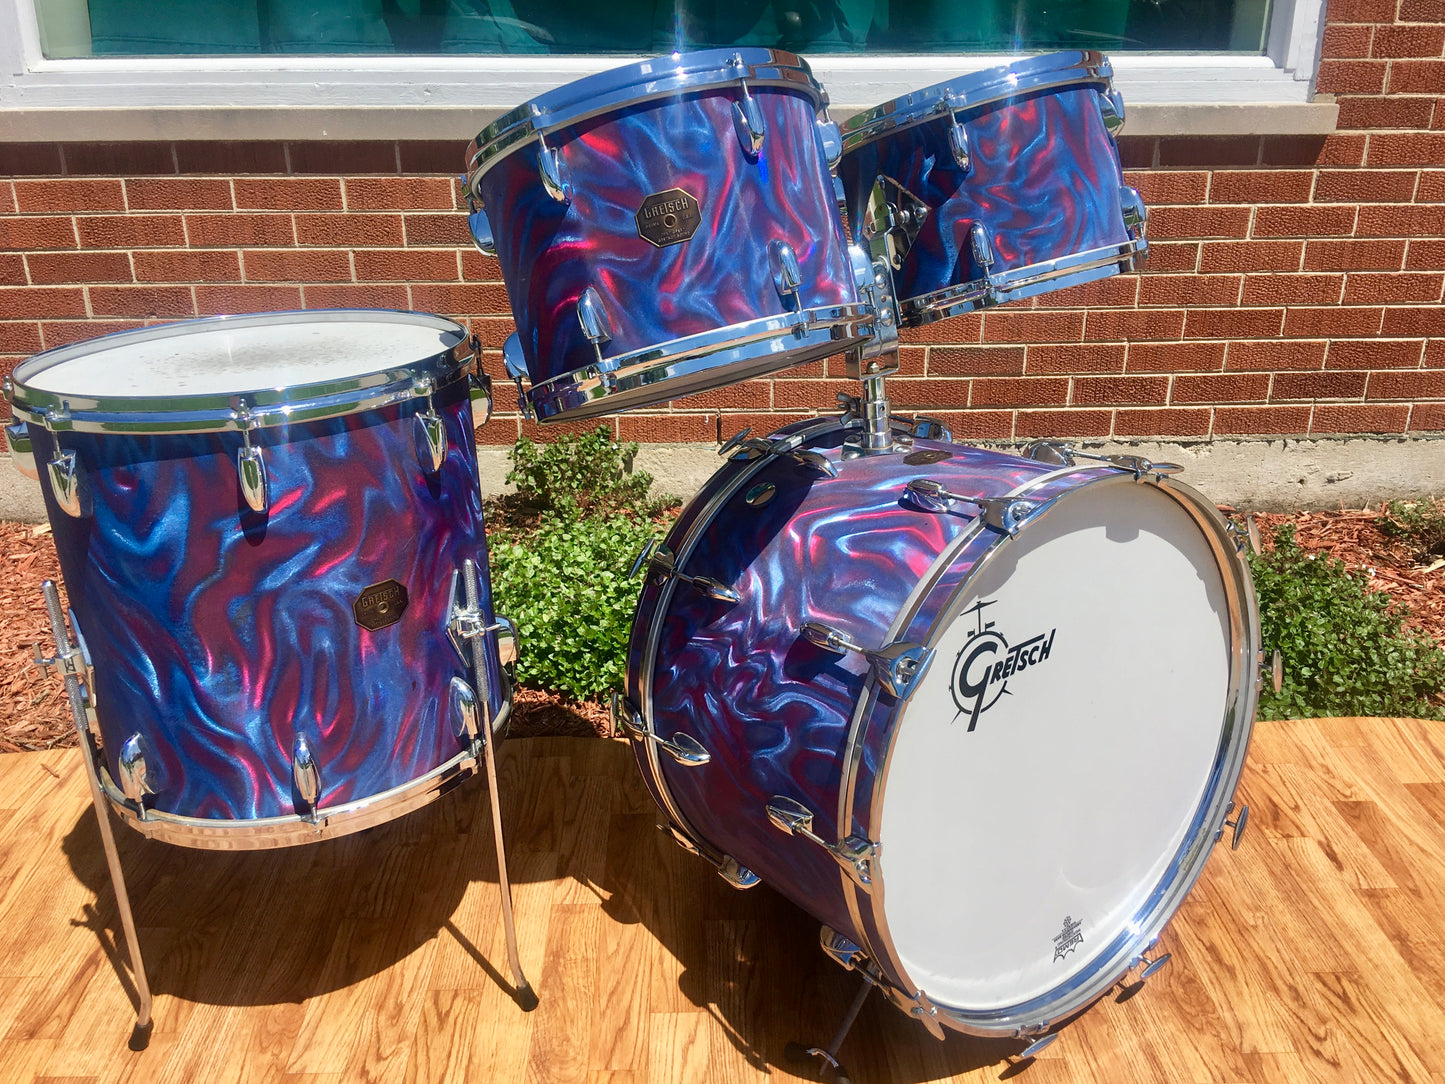 1971 Gretsch Stop Sign Badge Drum Set in Peacock Satin Flame